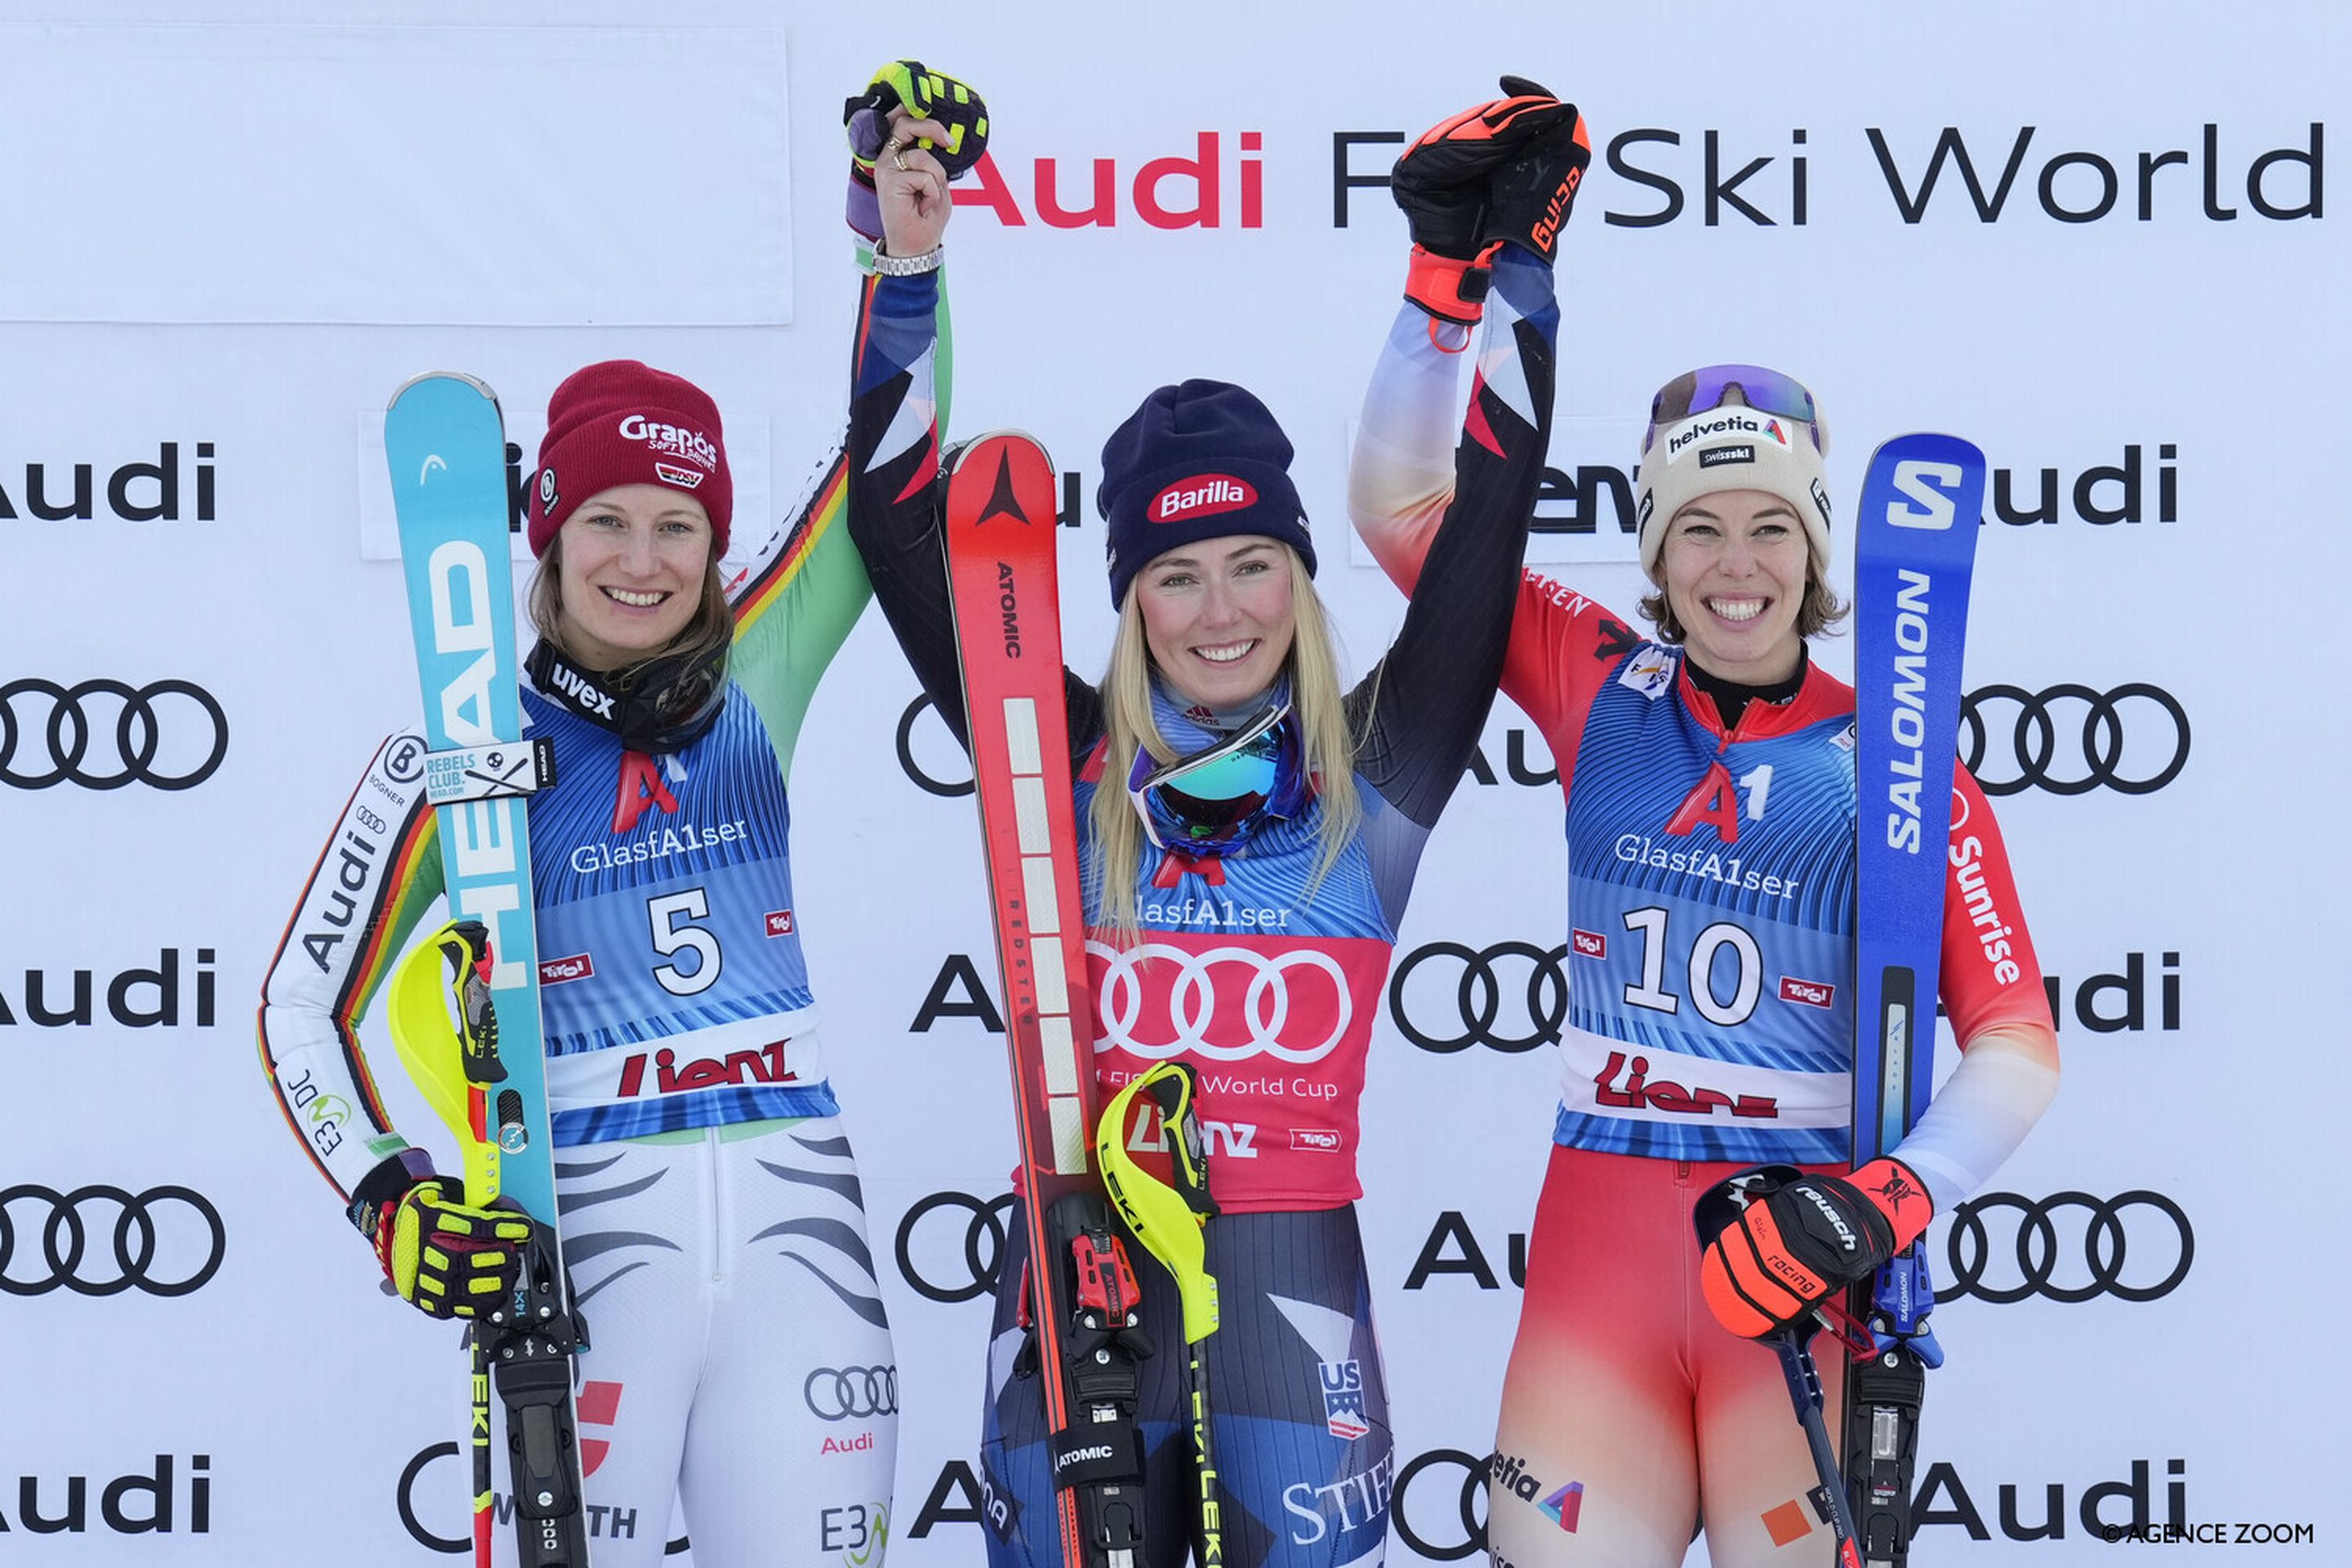 Friday's podium of Lena Duerr (GER, 2nd), Mikaela Shiffrin (USA, 1st) and Michelle Gisin (SUI, 3rd) (Agence Zoom)